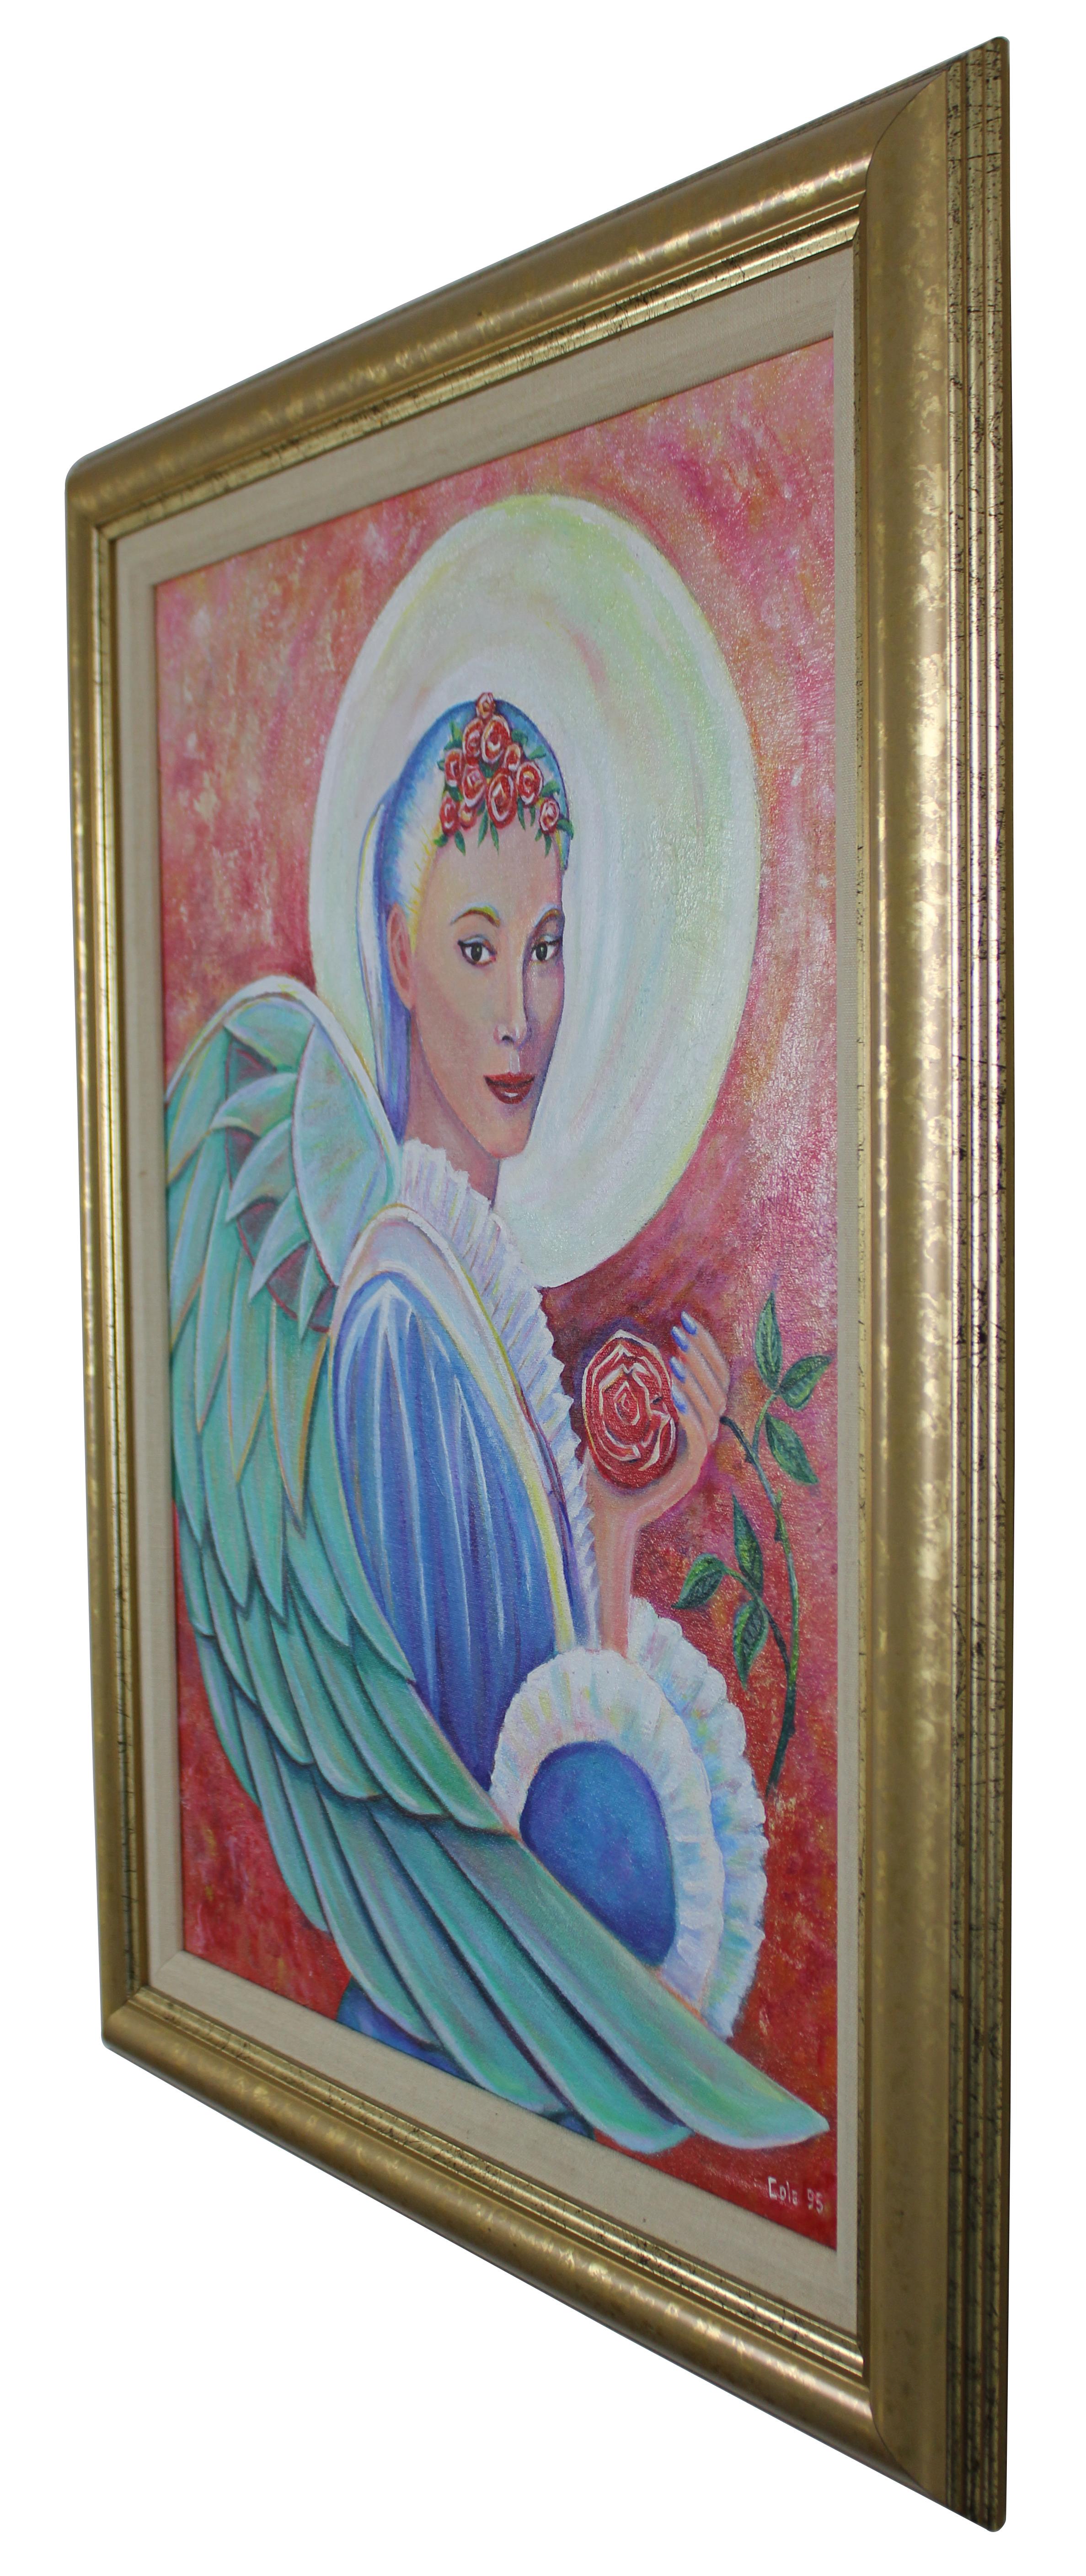 Vintage 1995 Archangel or Guardian Angel oil painting by Cole. Features an Angel of high rank dressed in a royal blue robe with roses, turquoise wings and Halo. Painted in vibrant colors.

Measures: Sans frame 18